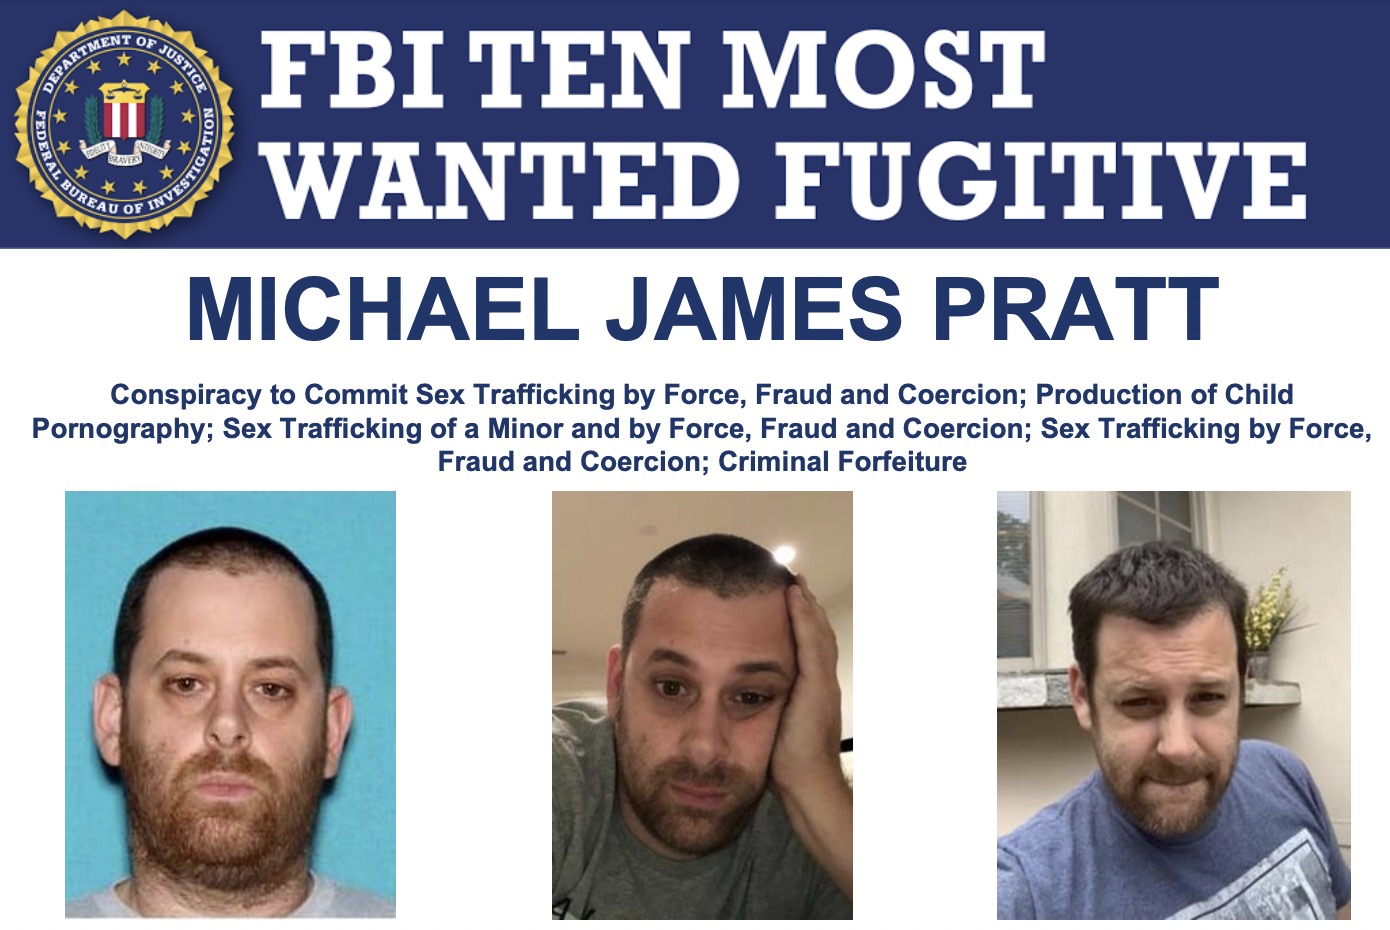 Sex Video Download 10 Minit - GirlsDoPorn founder, on the run for 3 years, now on FBI's Ten Most Wanted  list | Ars Technica